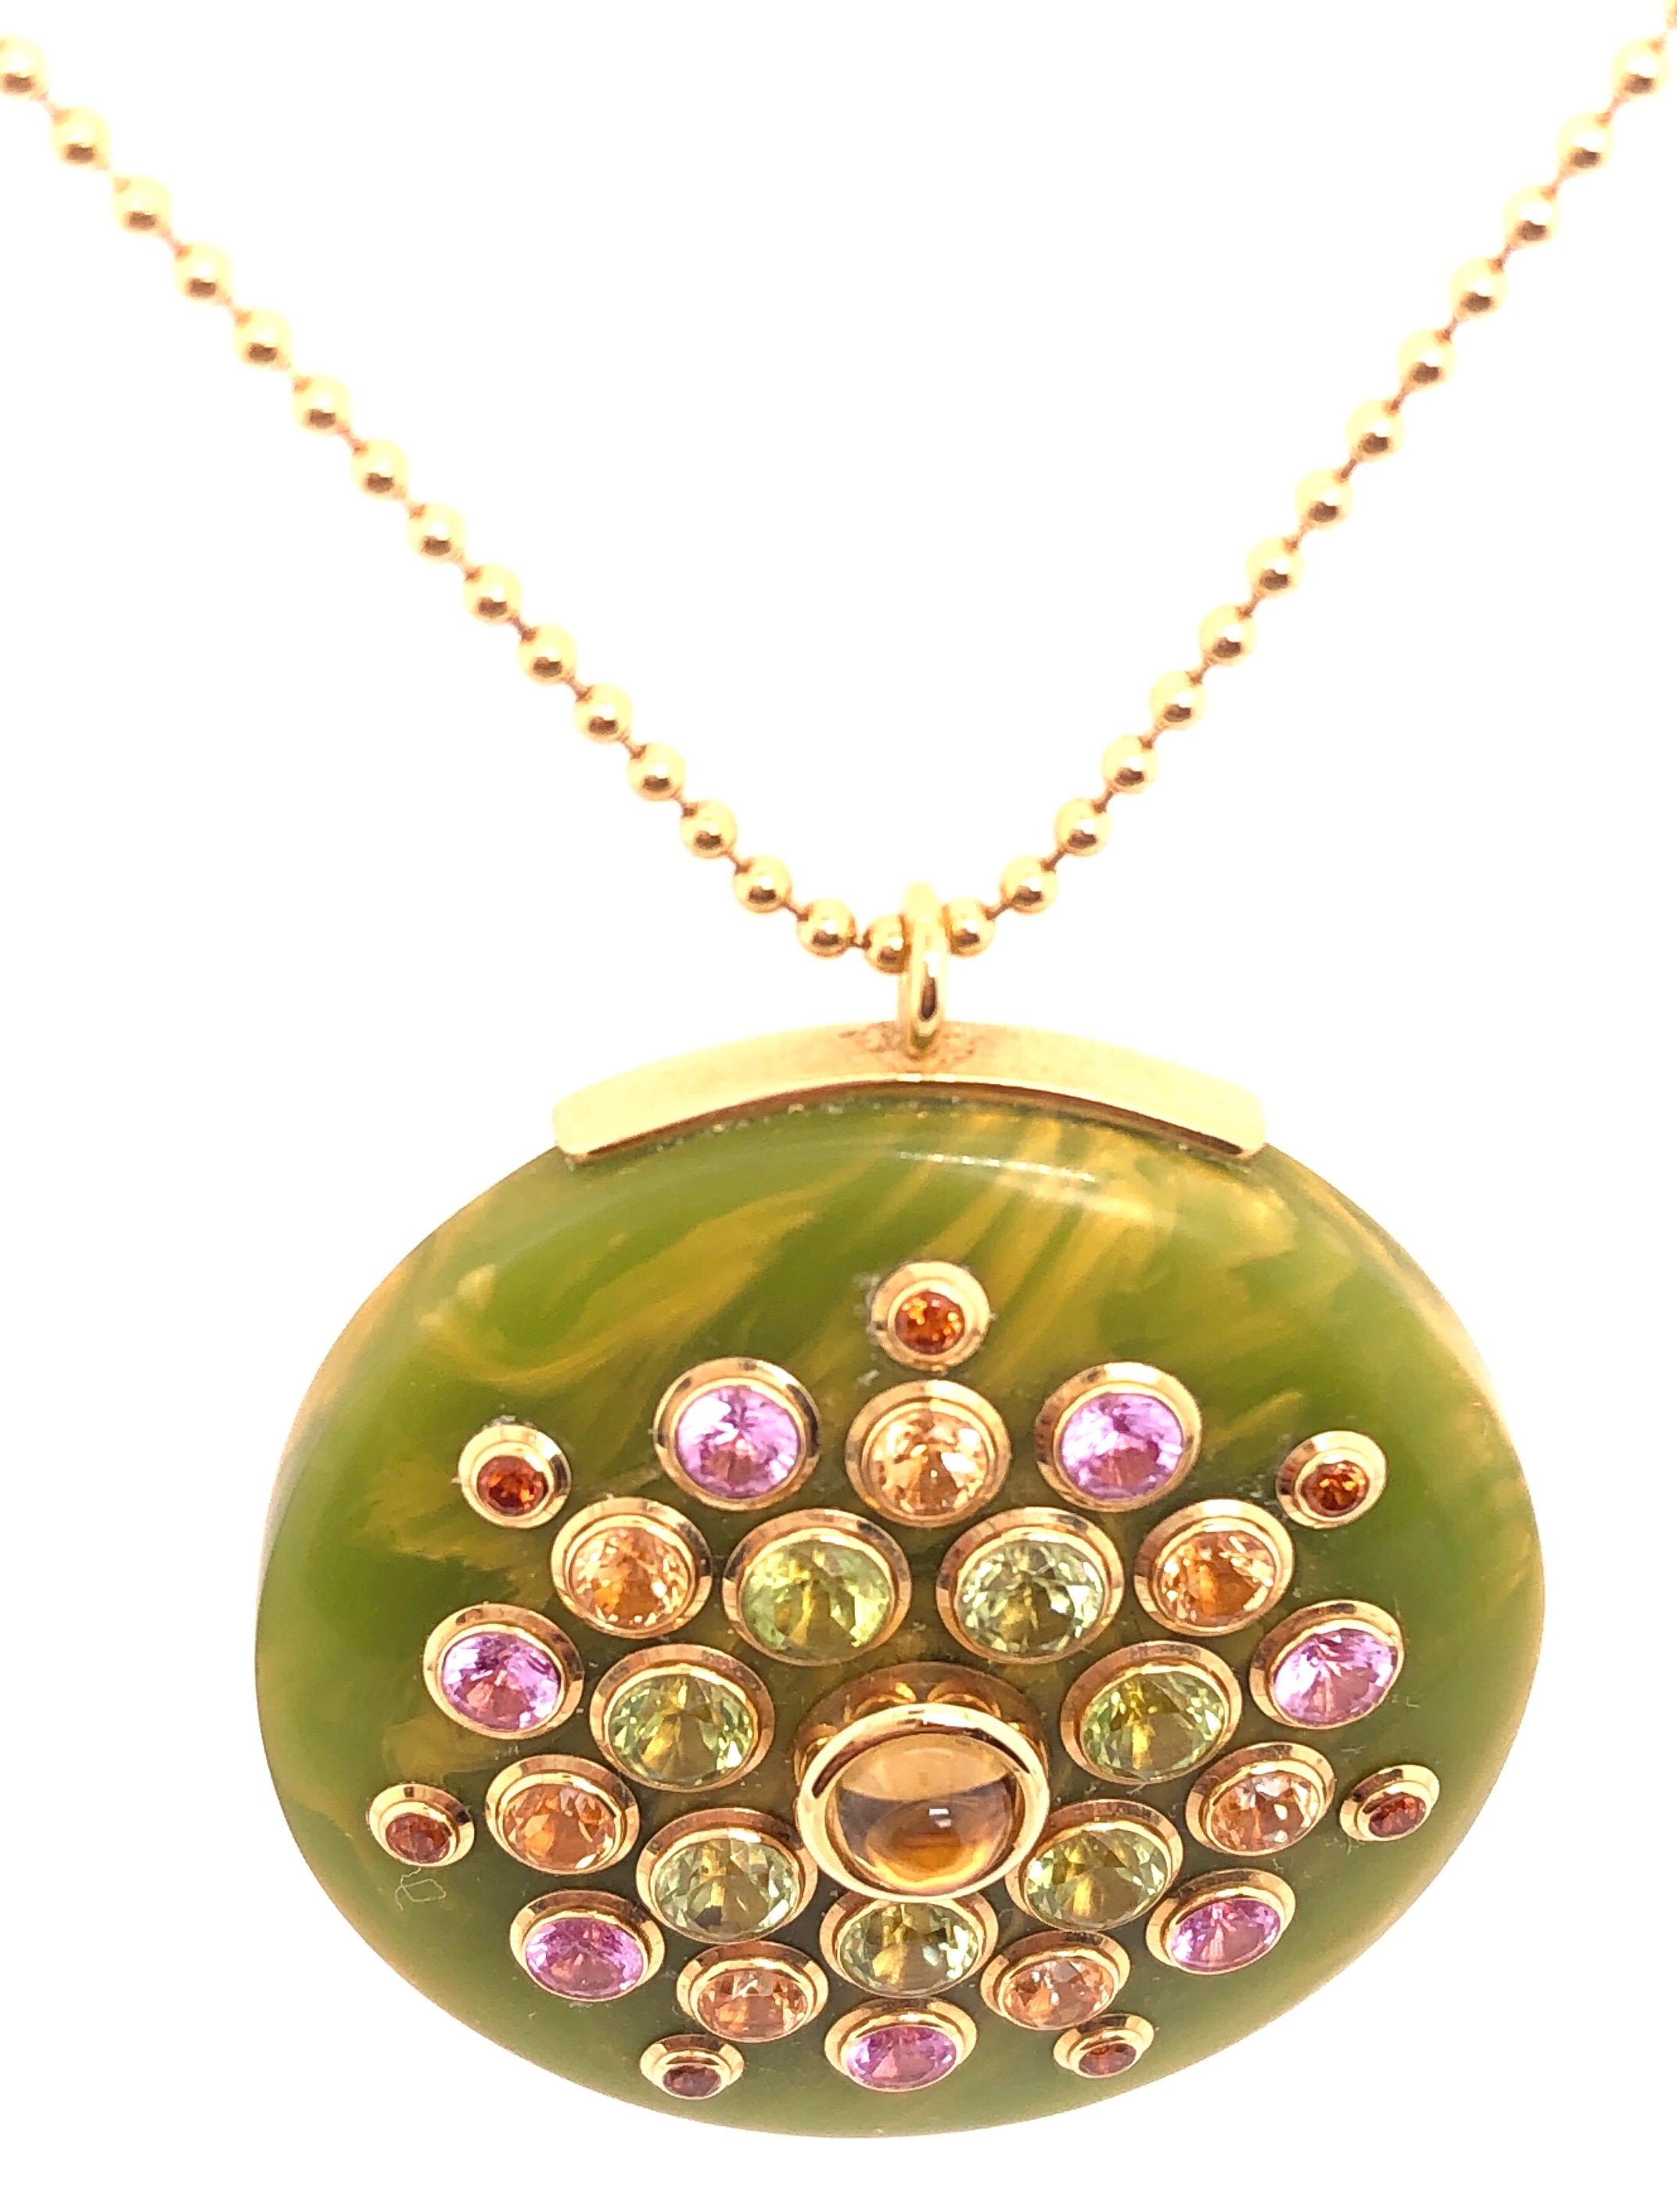 Modern Mark Davis 18 Karat Yellow Gold Necklace with Jeweled Pendant For Sale